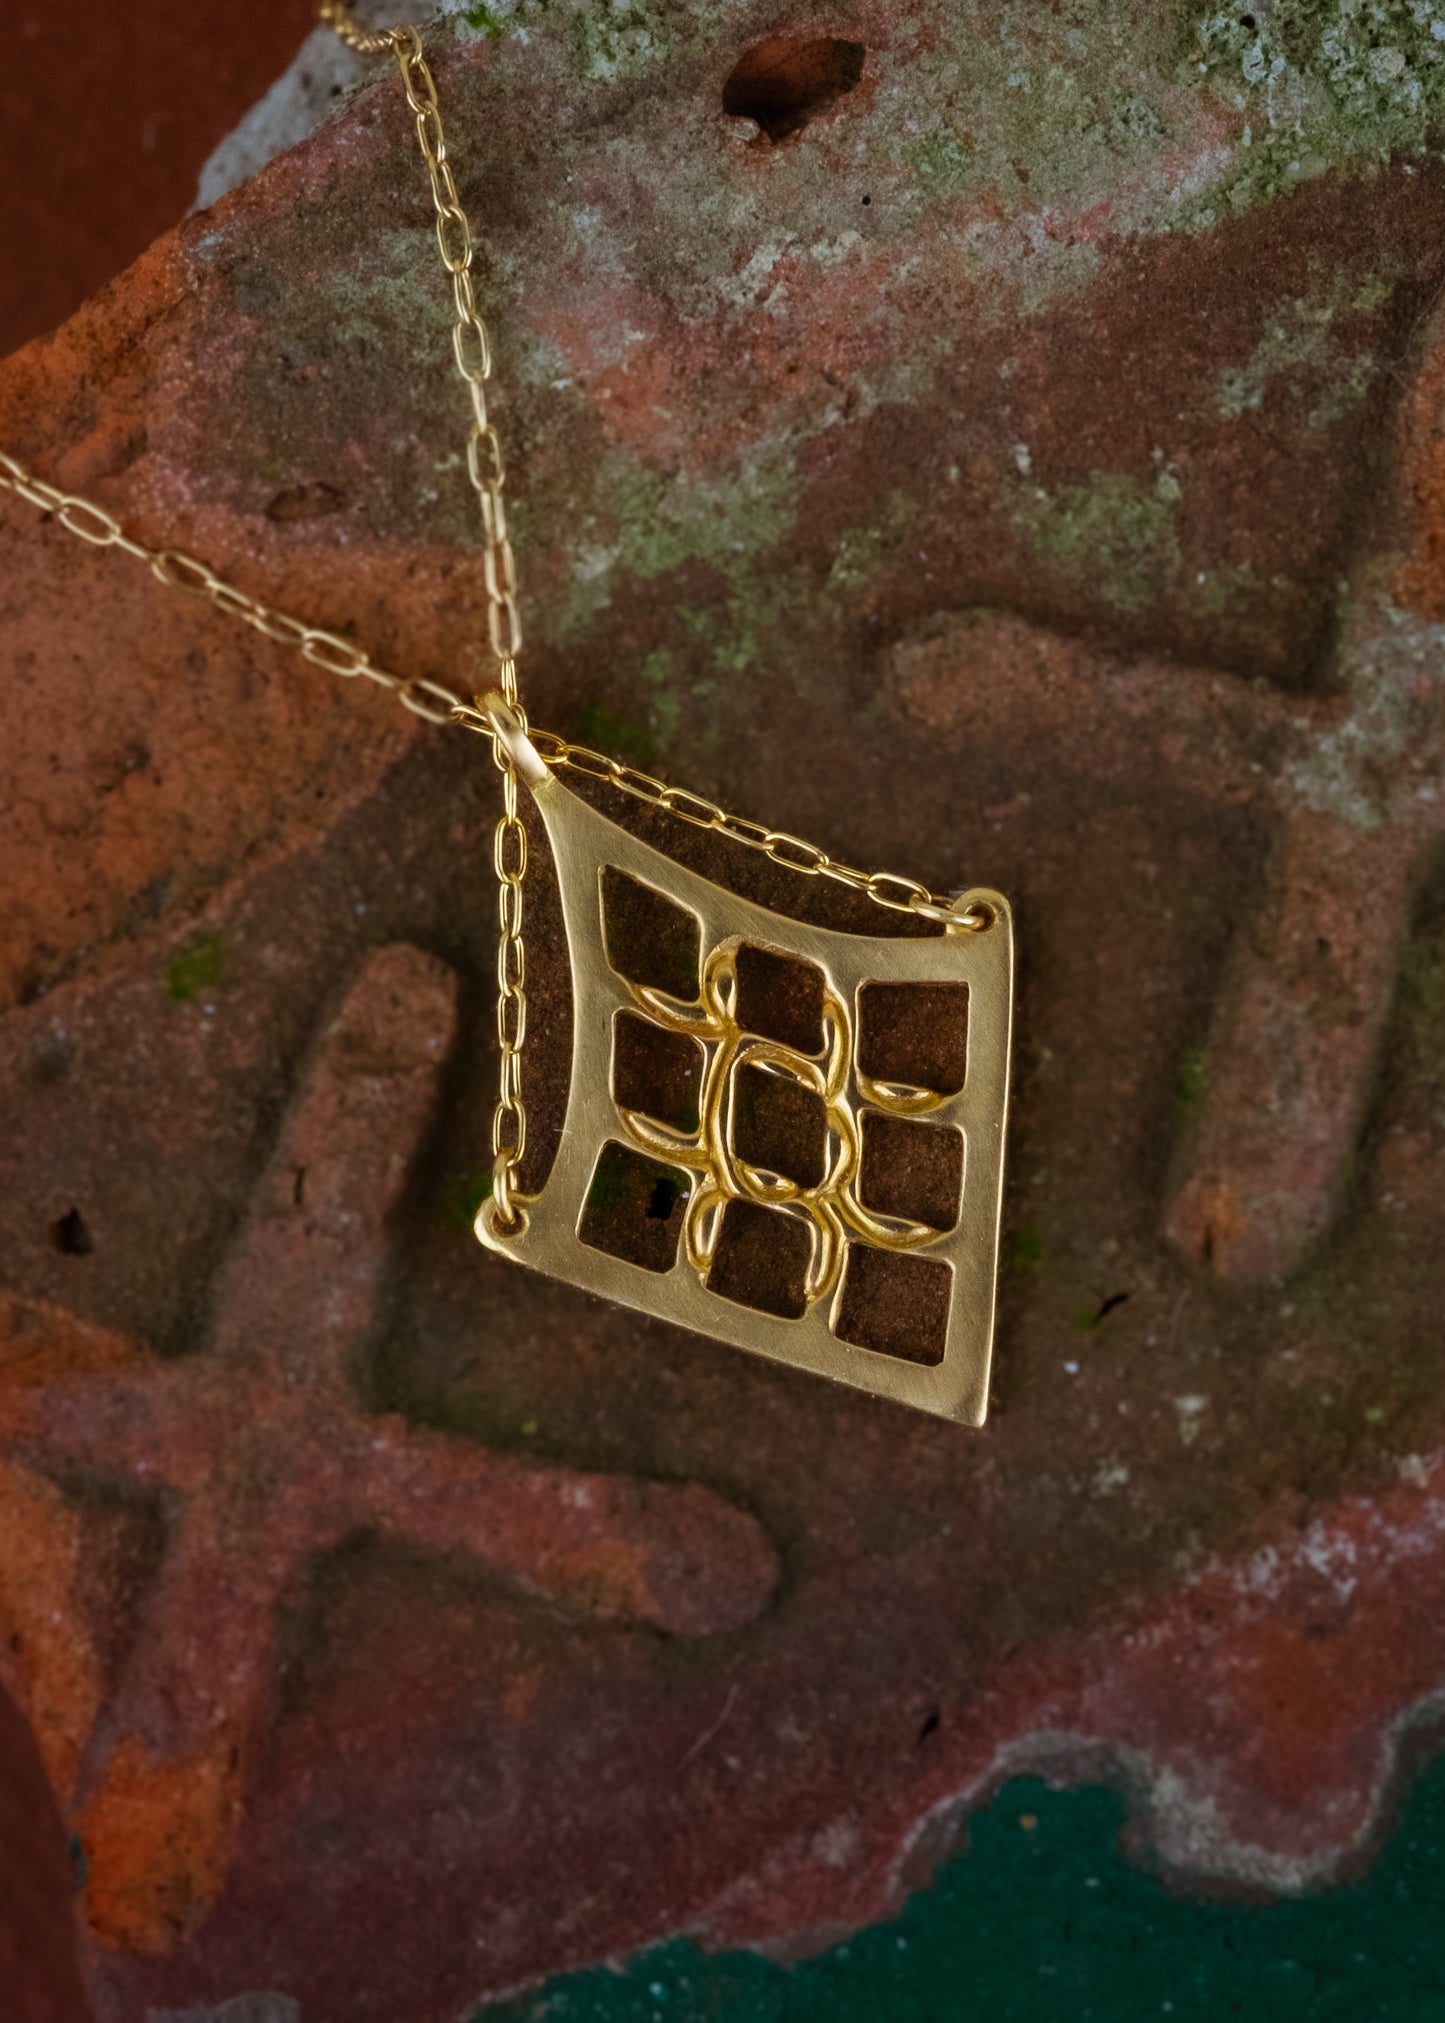 As formidable as the princess for which it is named. With its detailed gold lattice work, the Petite Shera necklace is a smaller version of the Shera necklace. A balance of delicate, bold and eye-catching, this is an empowering piece that makes a statement.